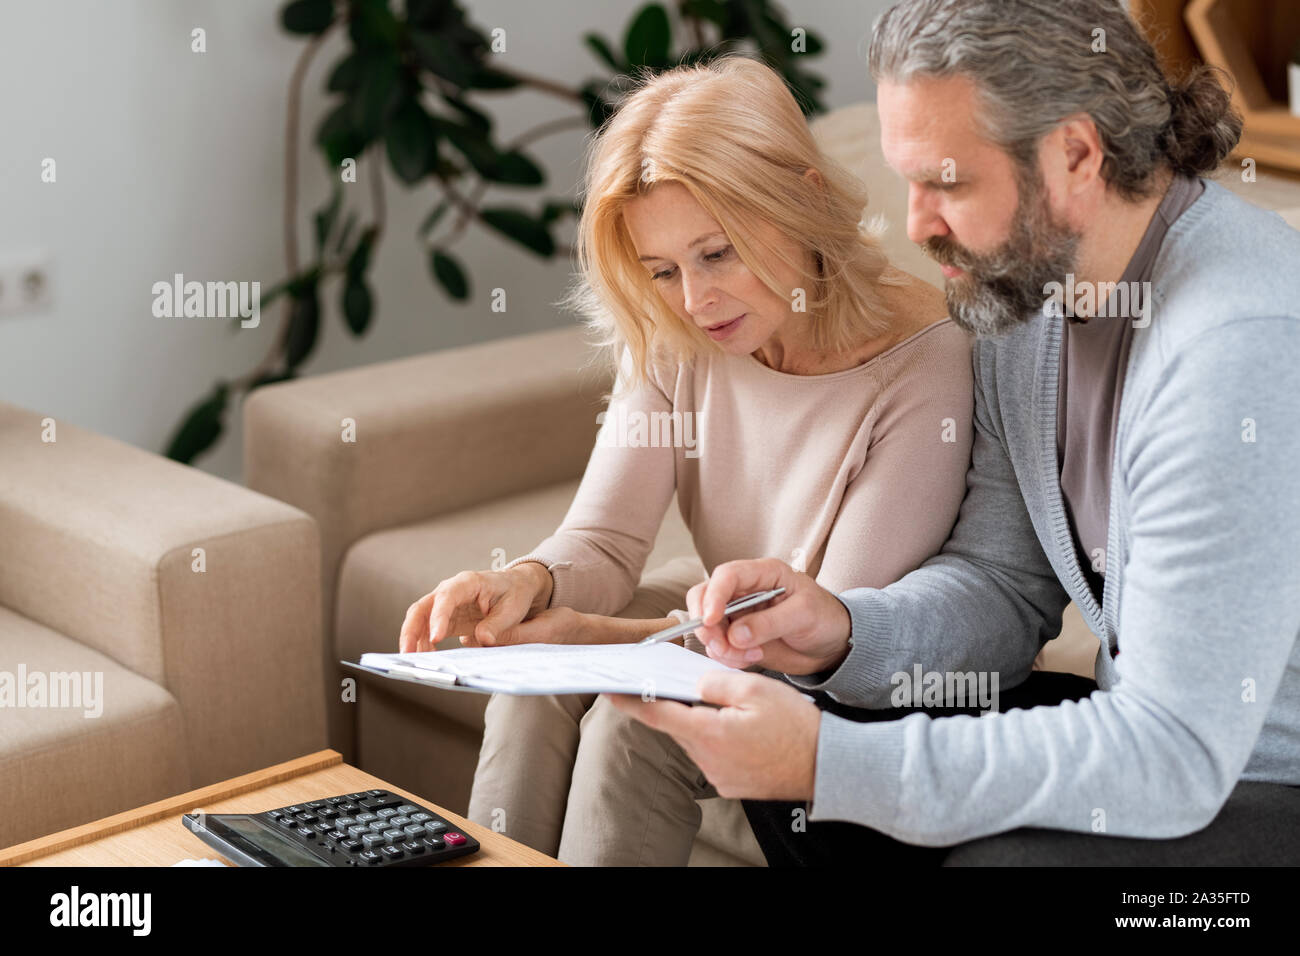 Bearded mature man pointing at contract while reading it with his wife Stock Photo